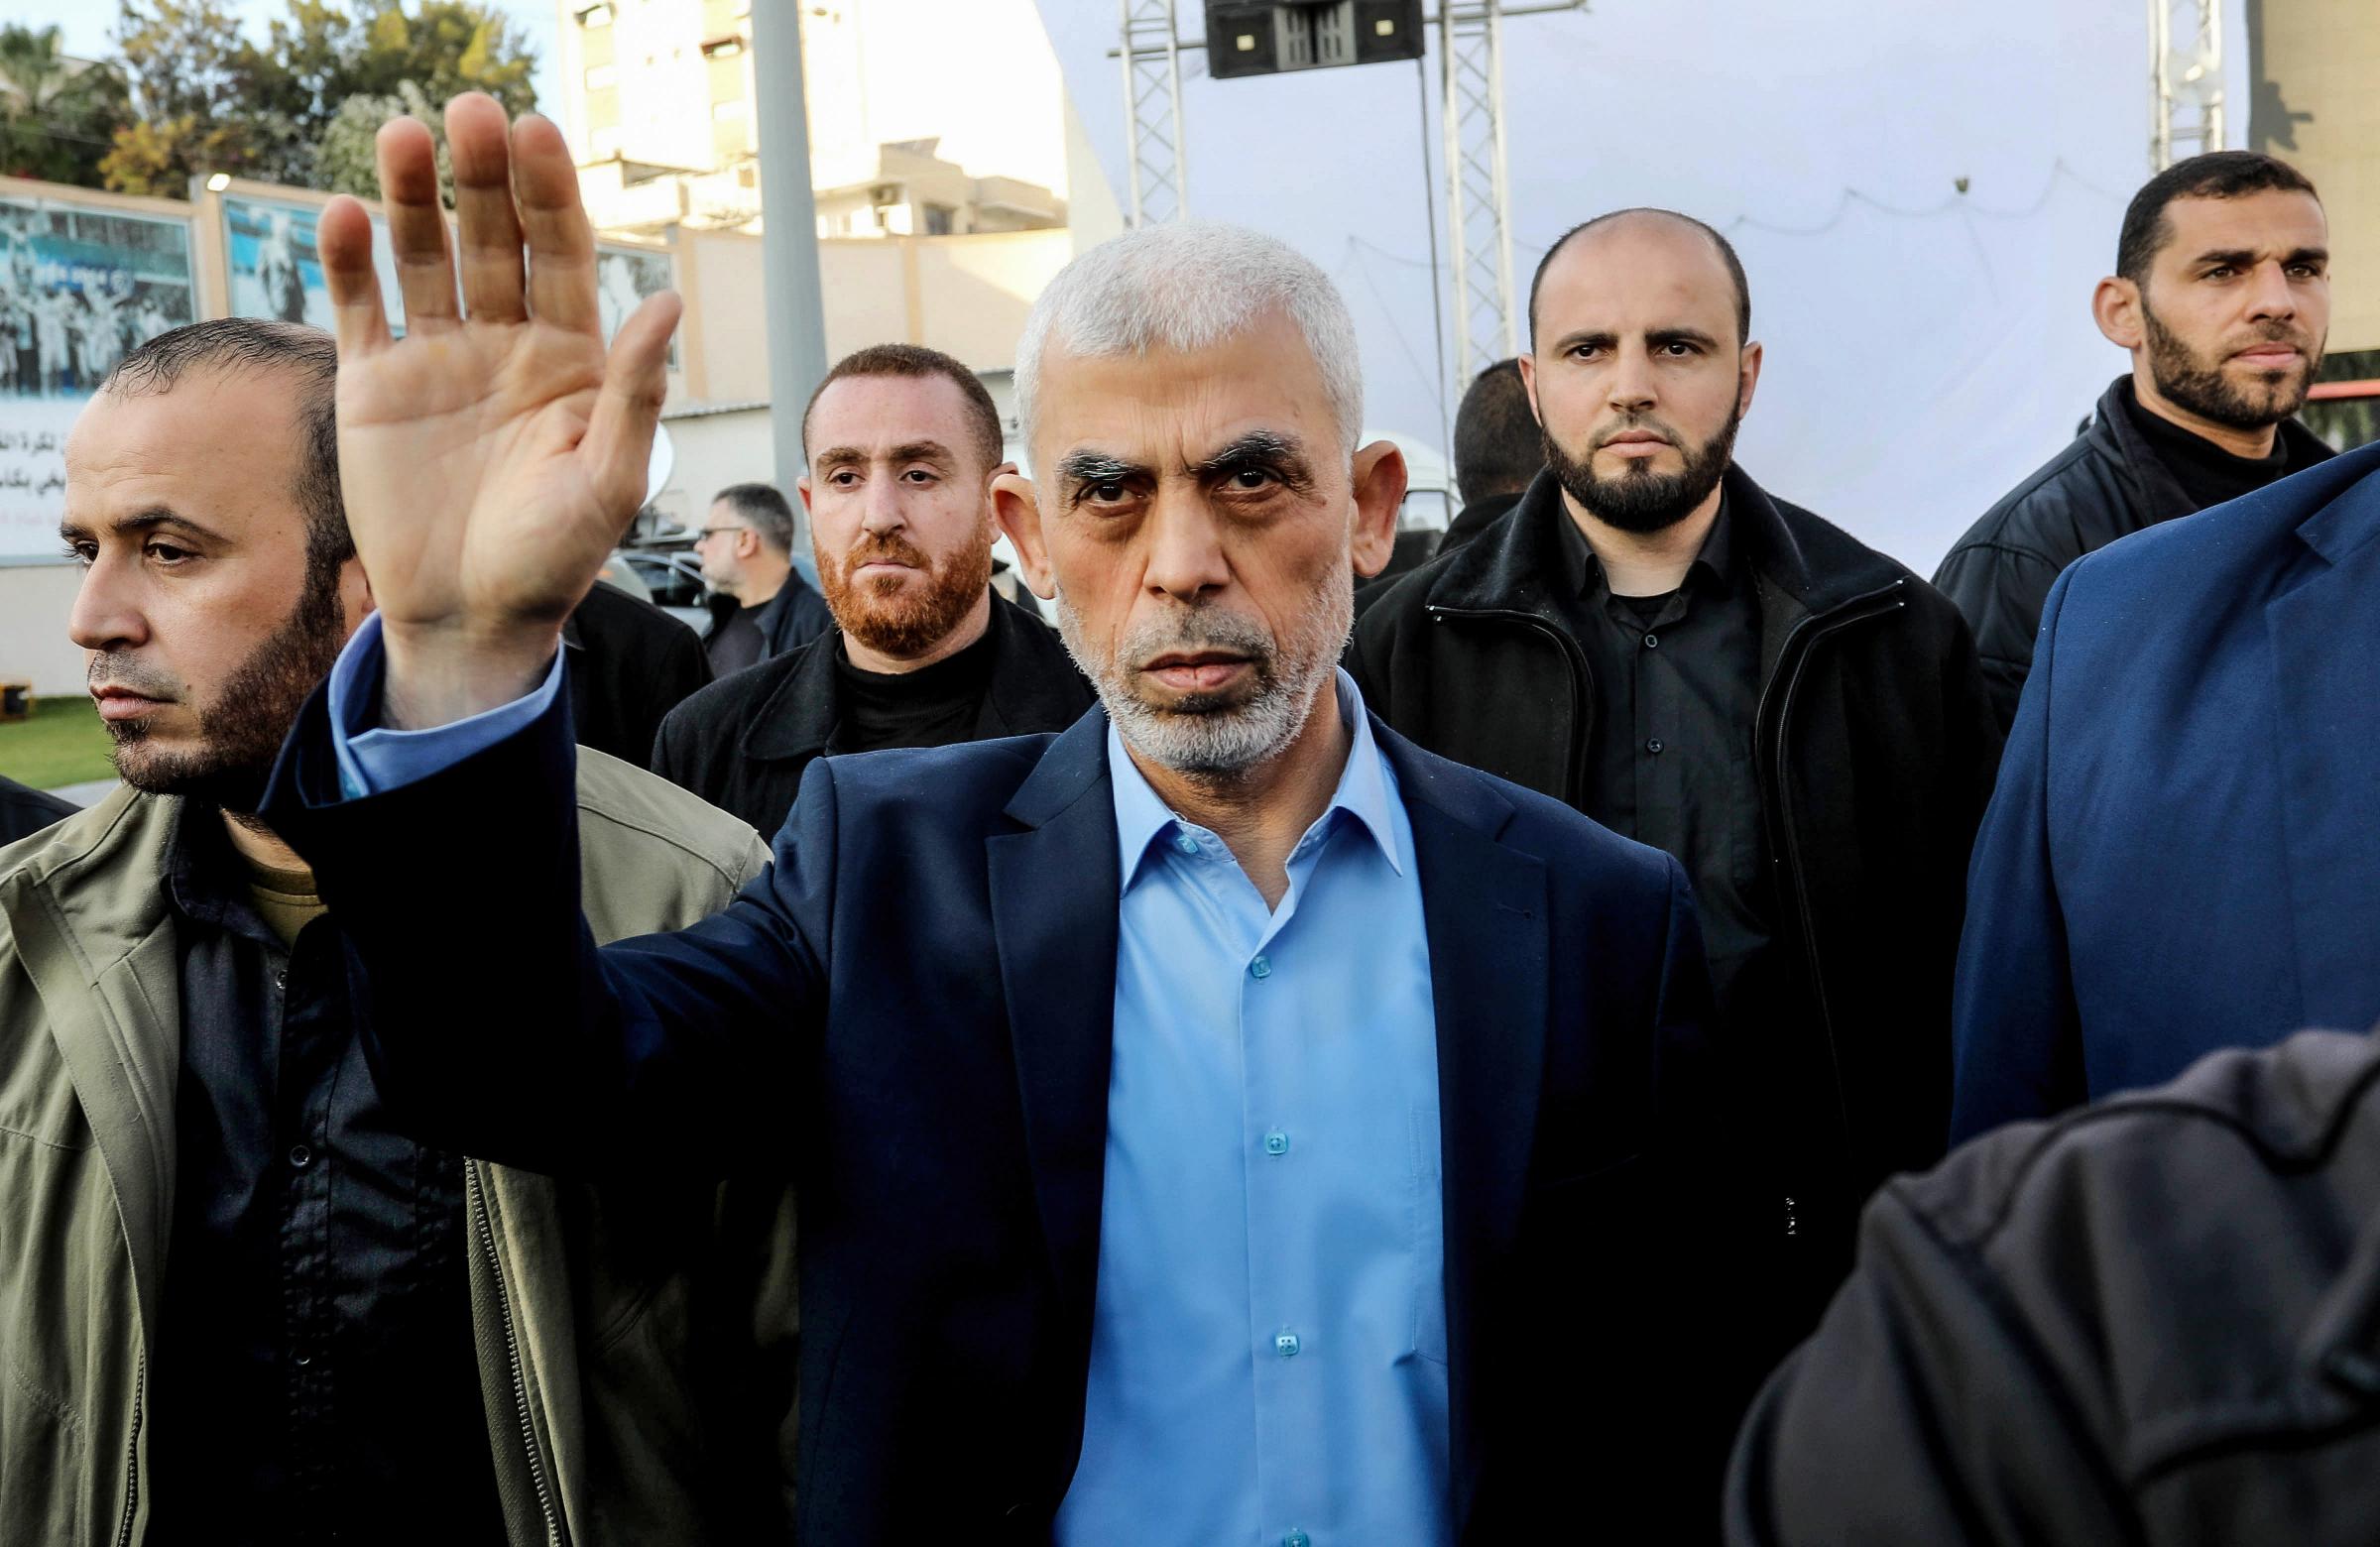 GAZA, PALESTINE - 2023/04/14: Yahya Sinwar, head of the Palestinian Islamic movement Hamas in the Gaza Strip, waves his hand to the crowd during the celebration of International Quds Day in Gaza City. The chief of the Palestinian Islamist Hamas movement